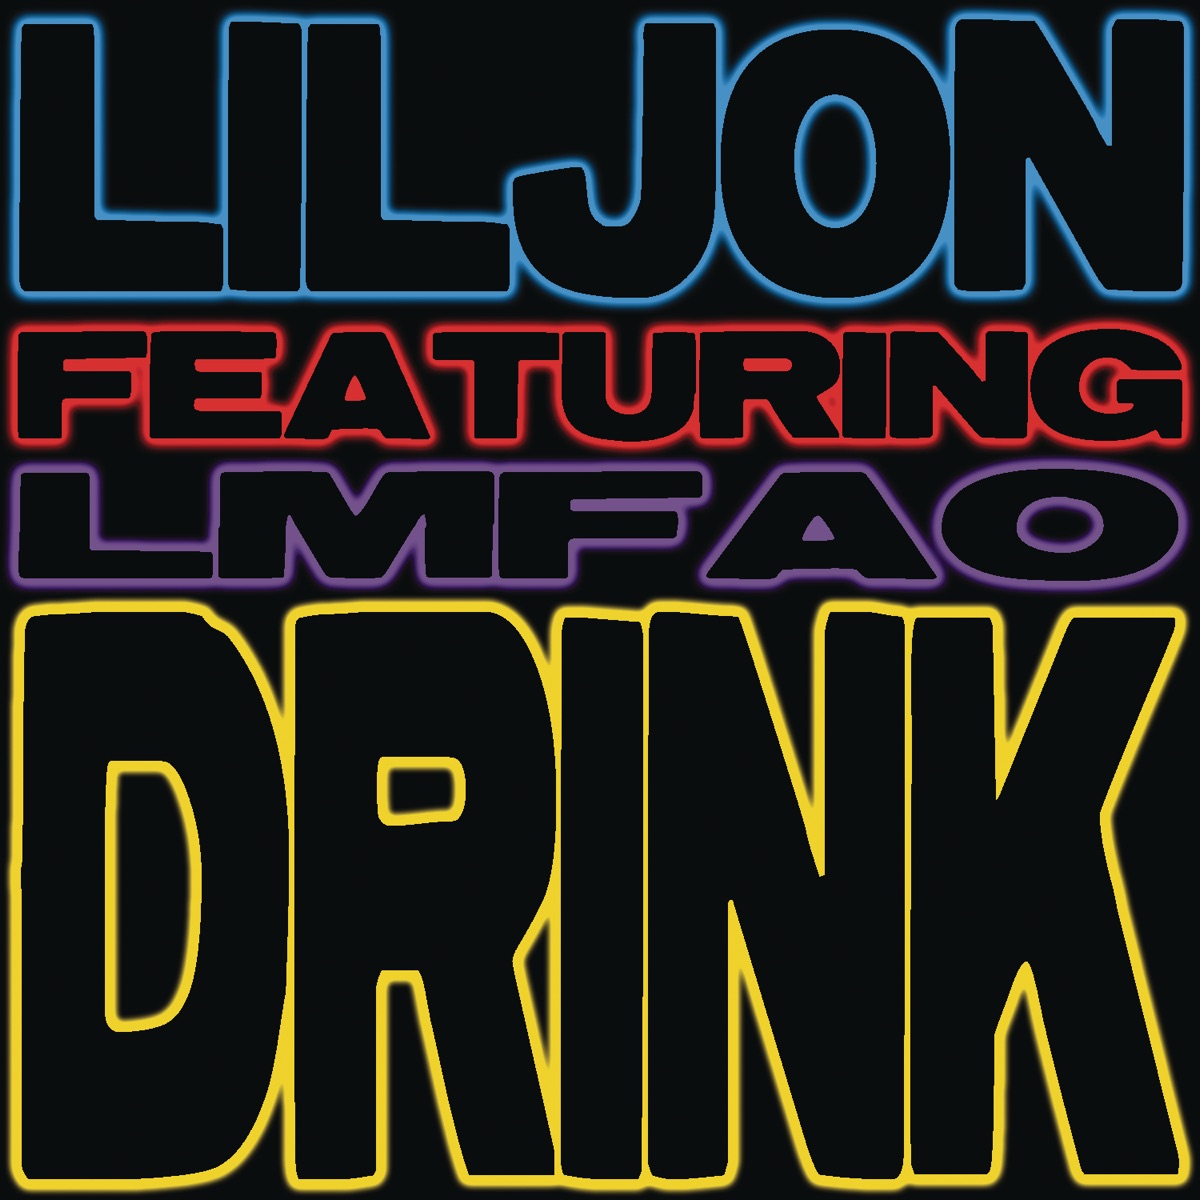 Lil Jon ft. featuring LMFAO Drink cover artwork